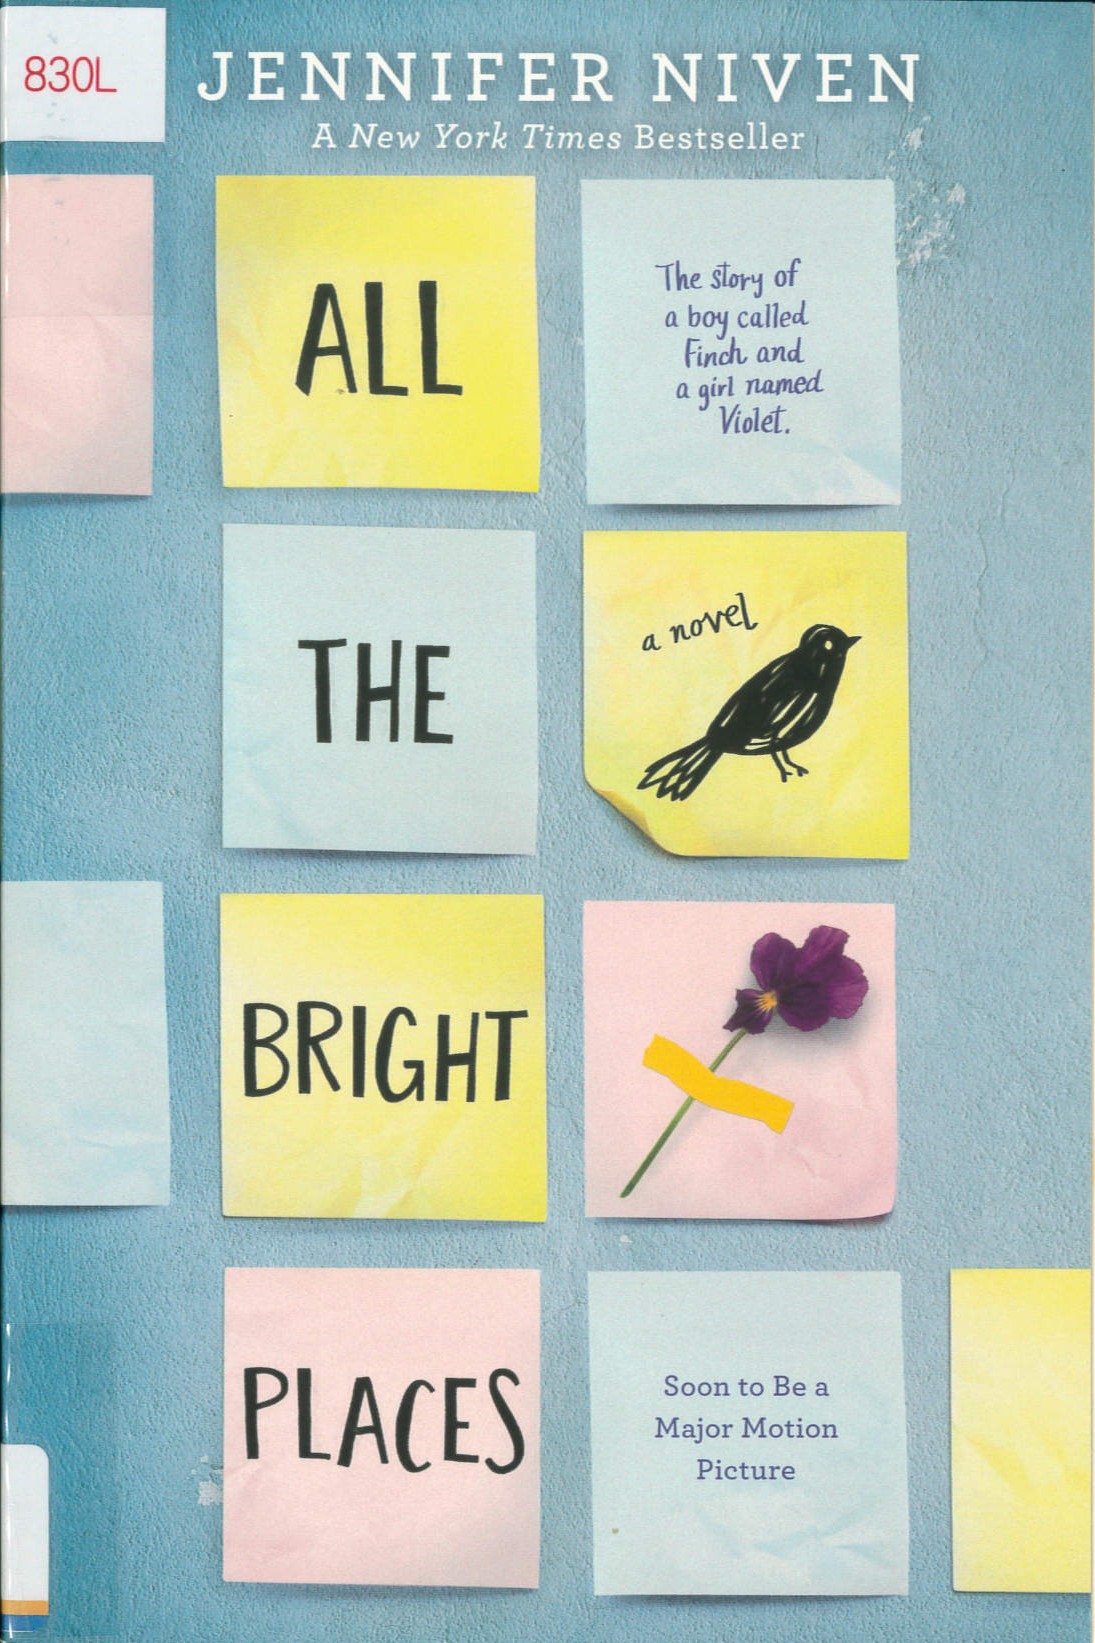 All the bright places /